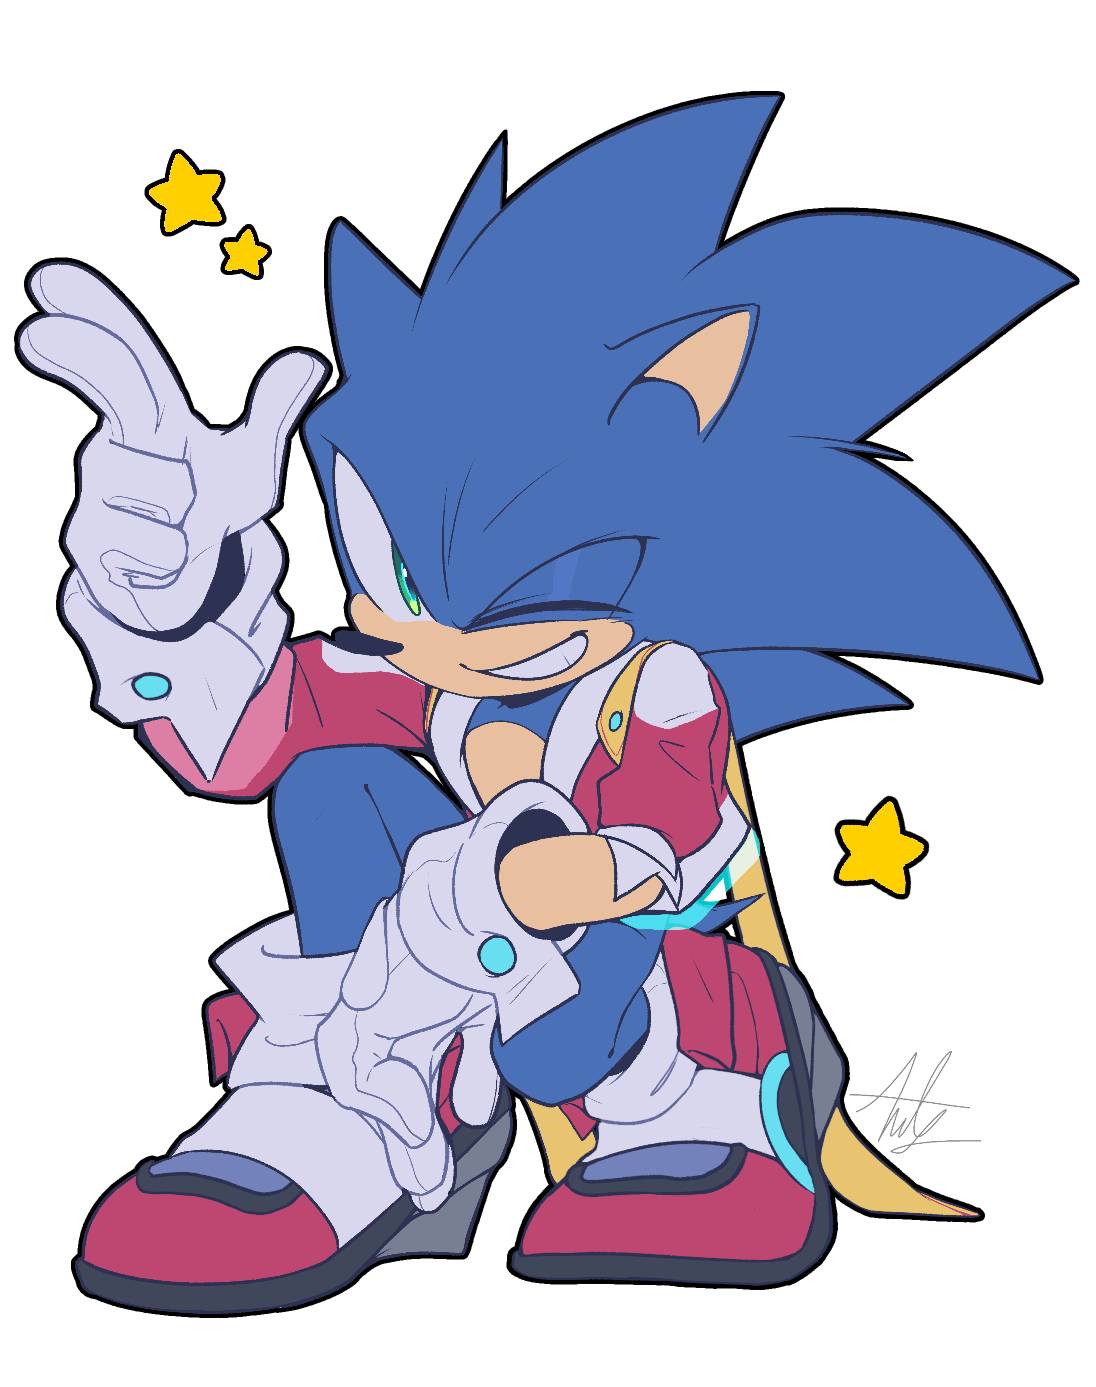 Dark Sonic :: Alright Then by LittoDitto - Fanart Central